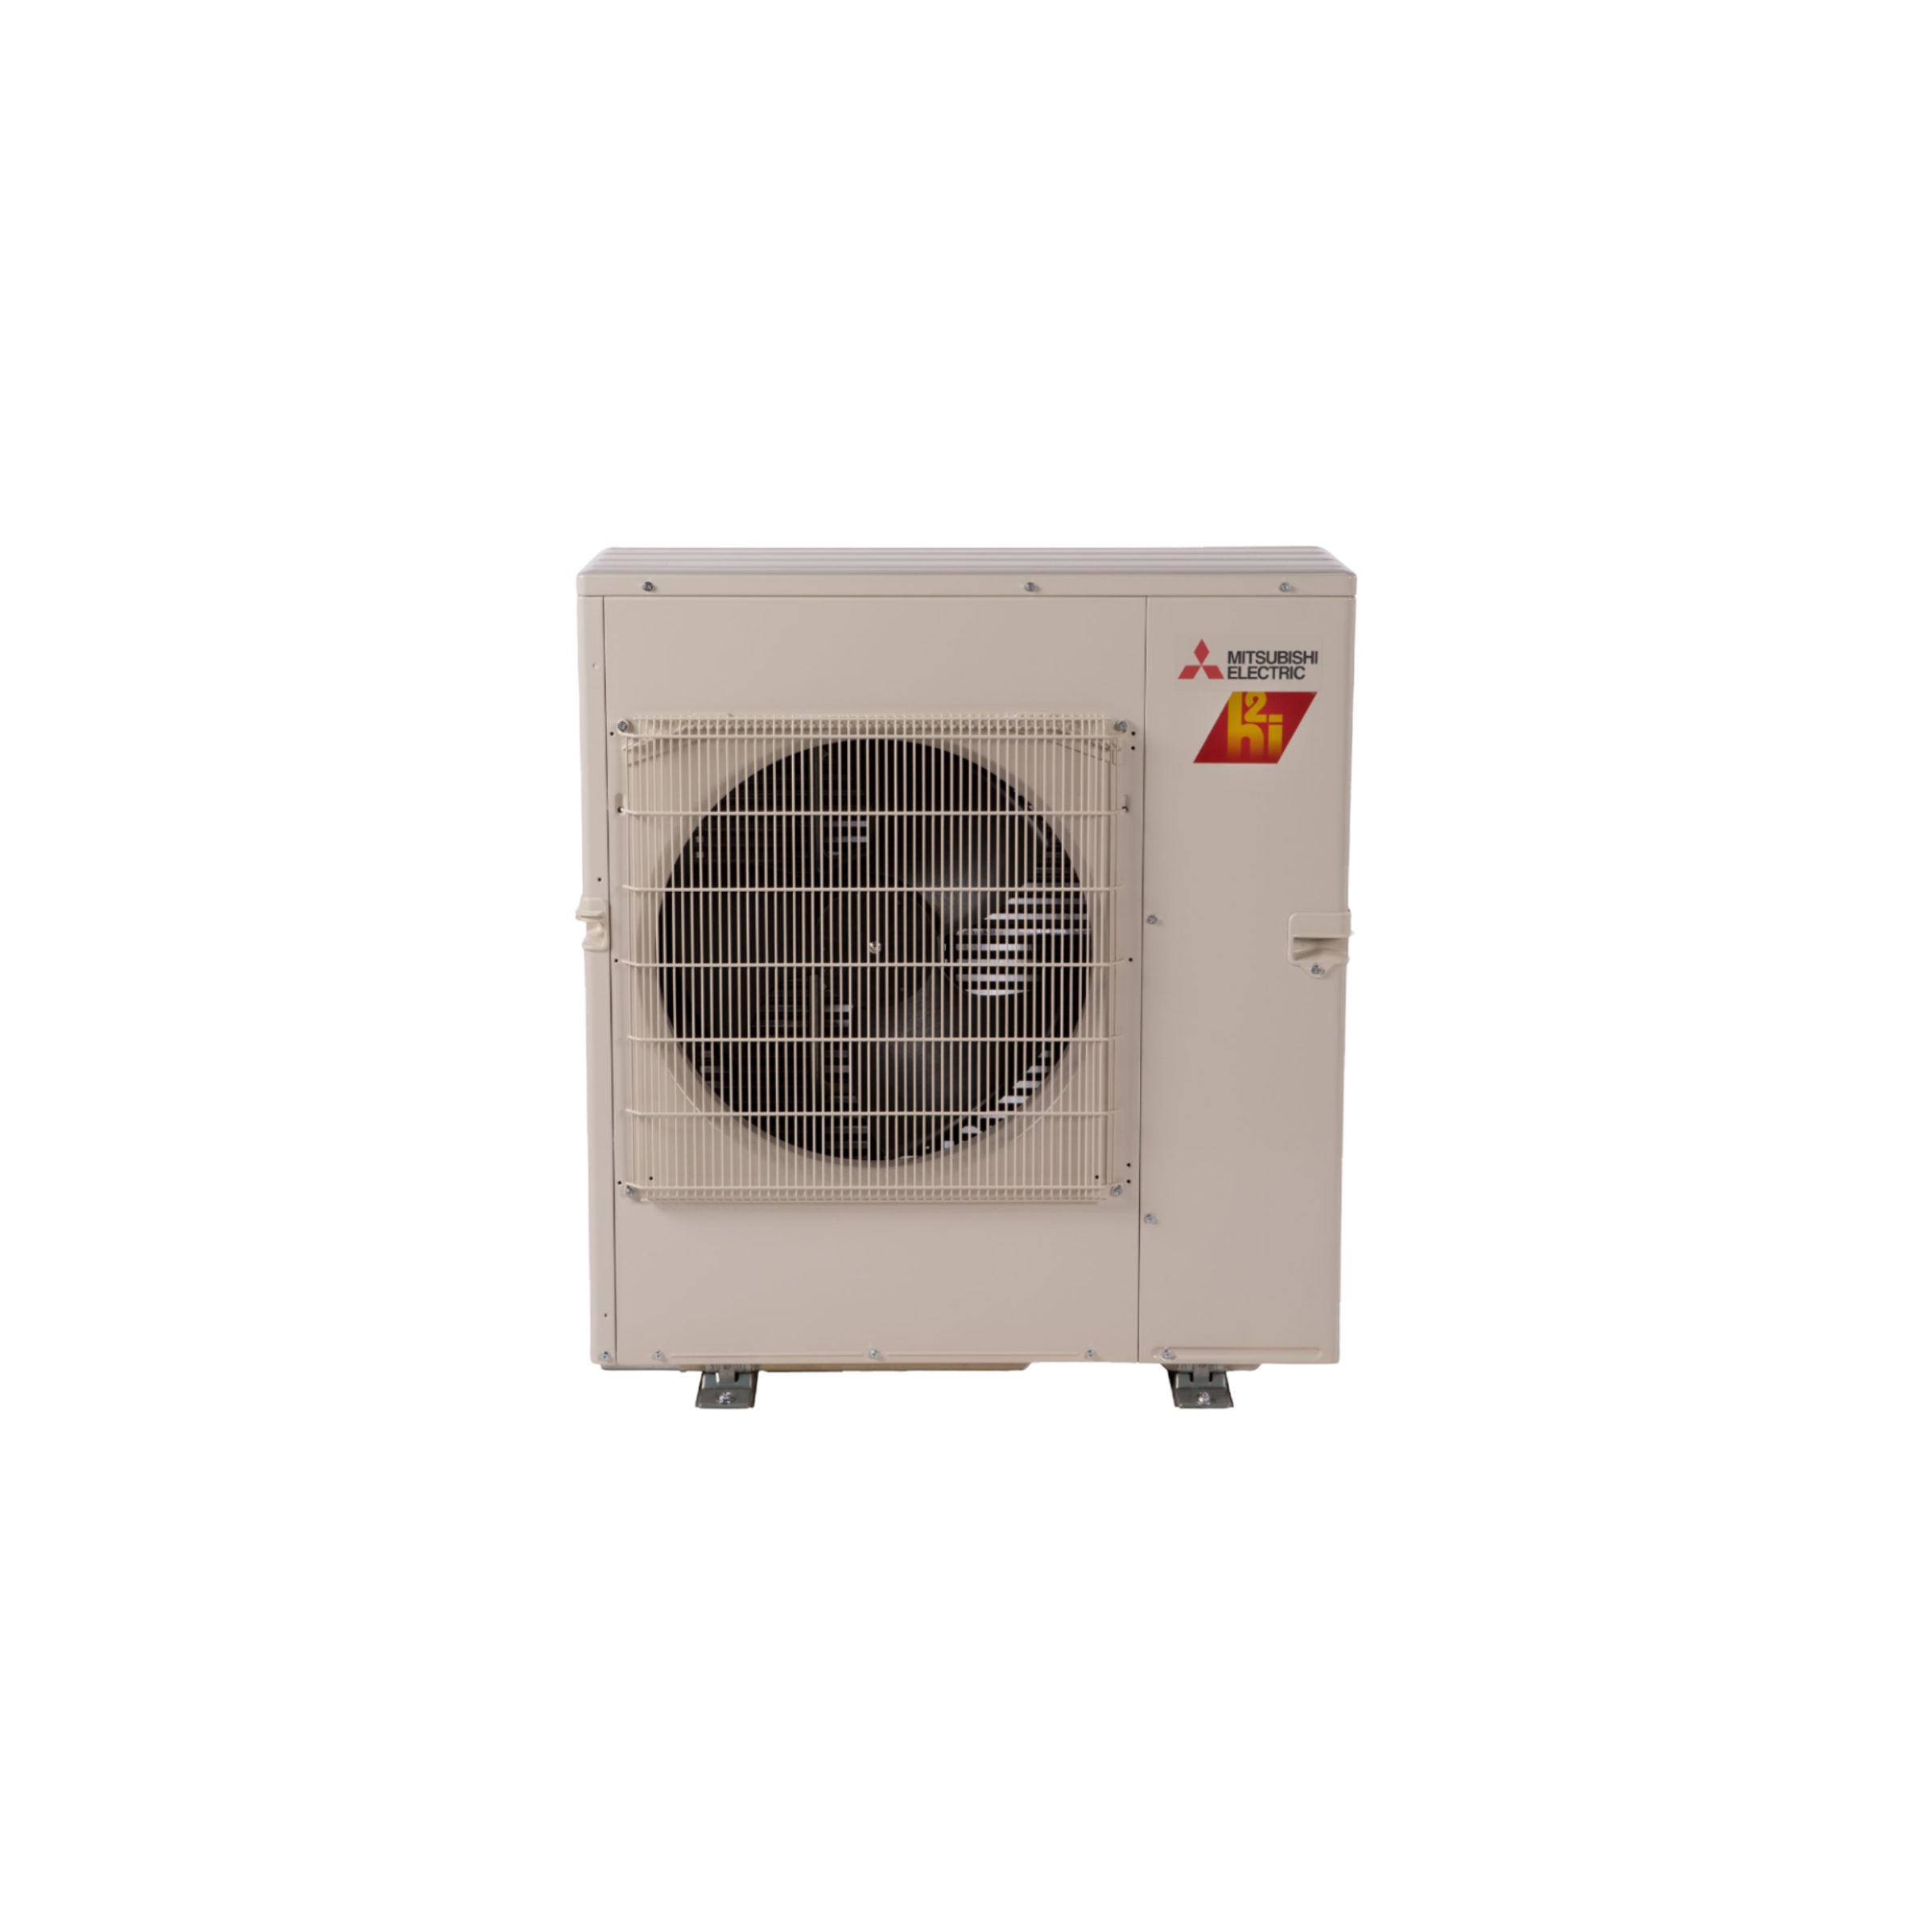 Mitsubishi 3 Zone 19 SEER Multi-Zone Ductless Mini-Split System Hyper Heat Pump Air Conditioner M Series Model MXZ-3C24NAHZ2 24000 BTU for Outdoor Unit Connected with 3 Indoor units, R-410A